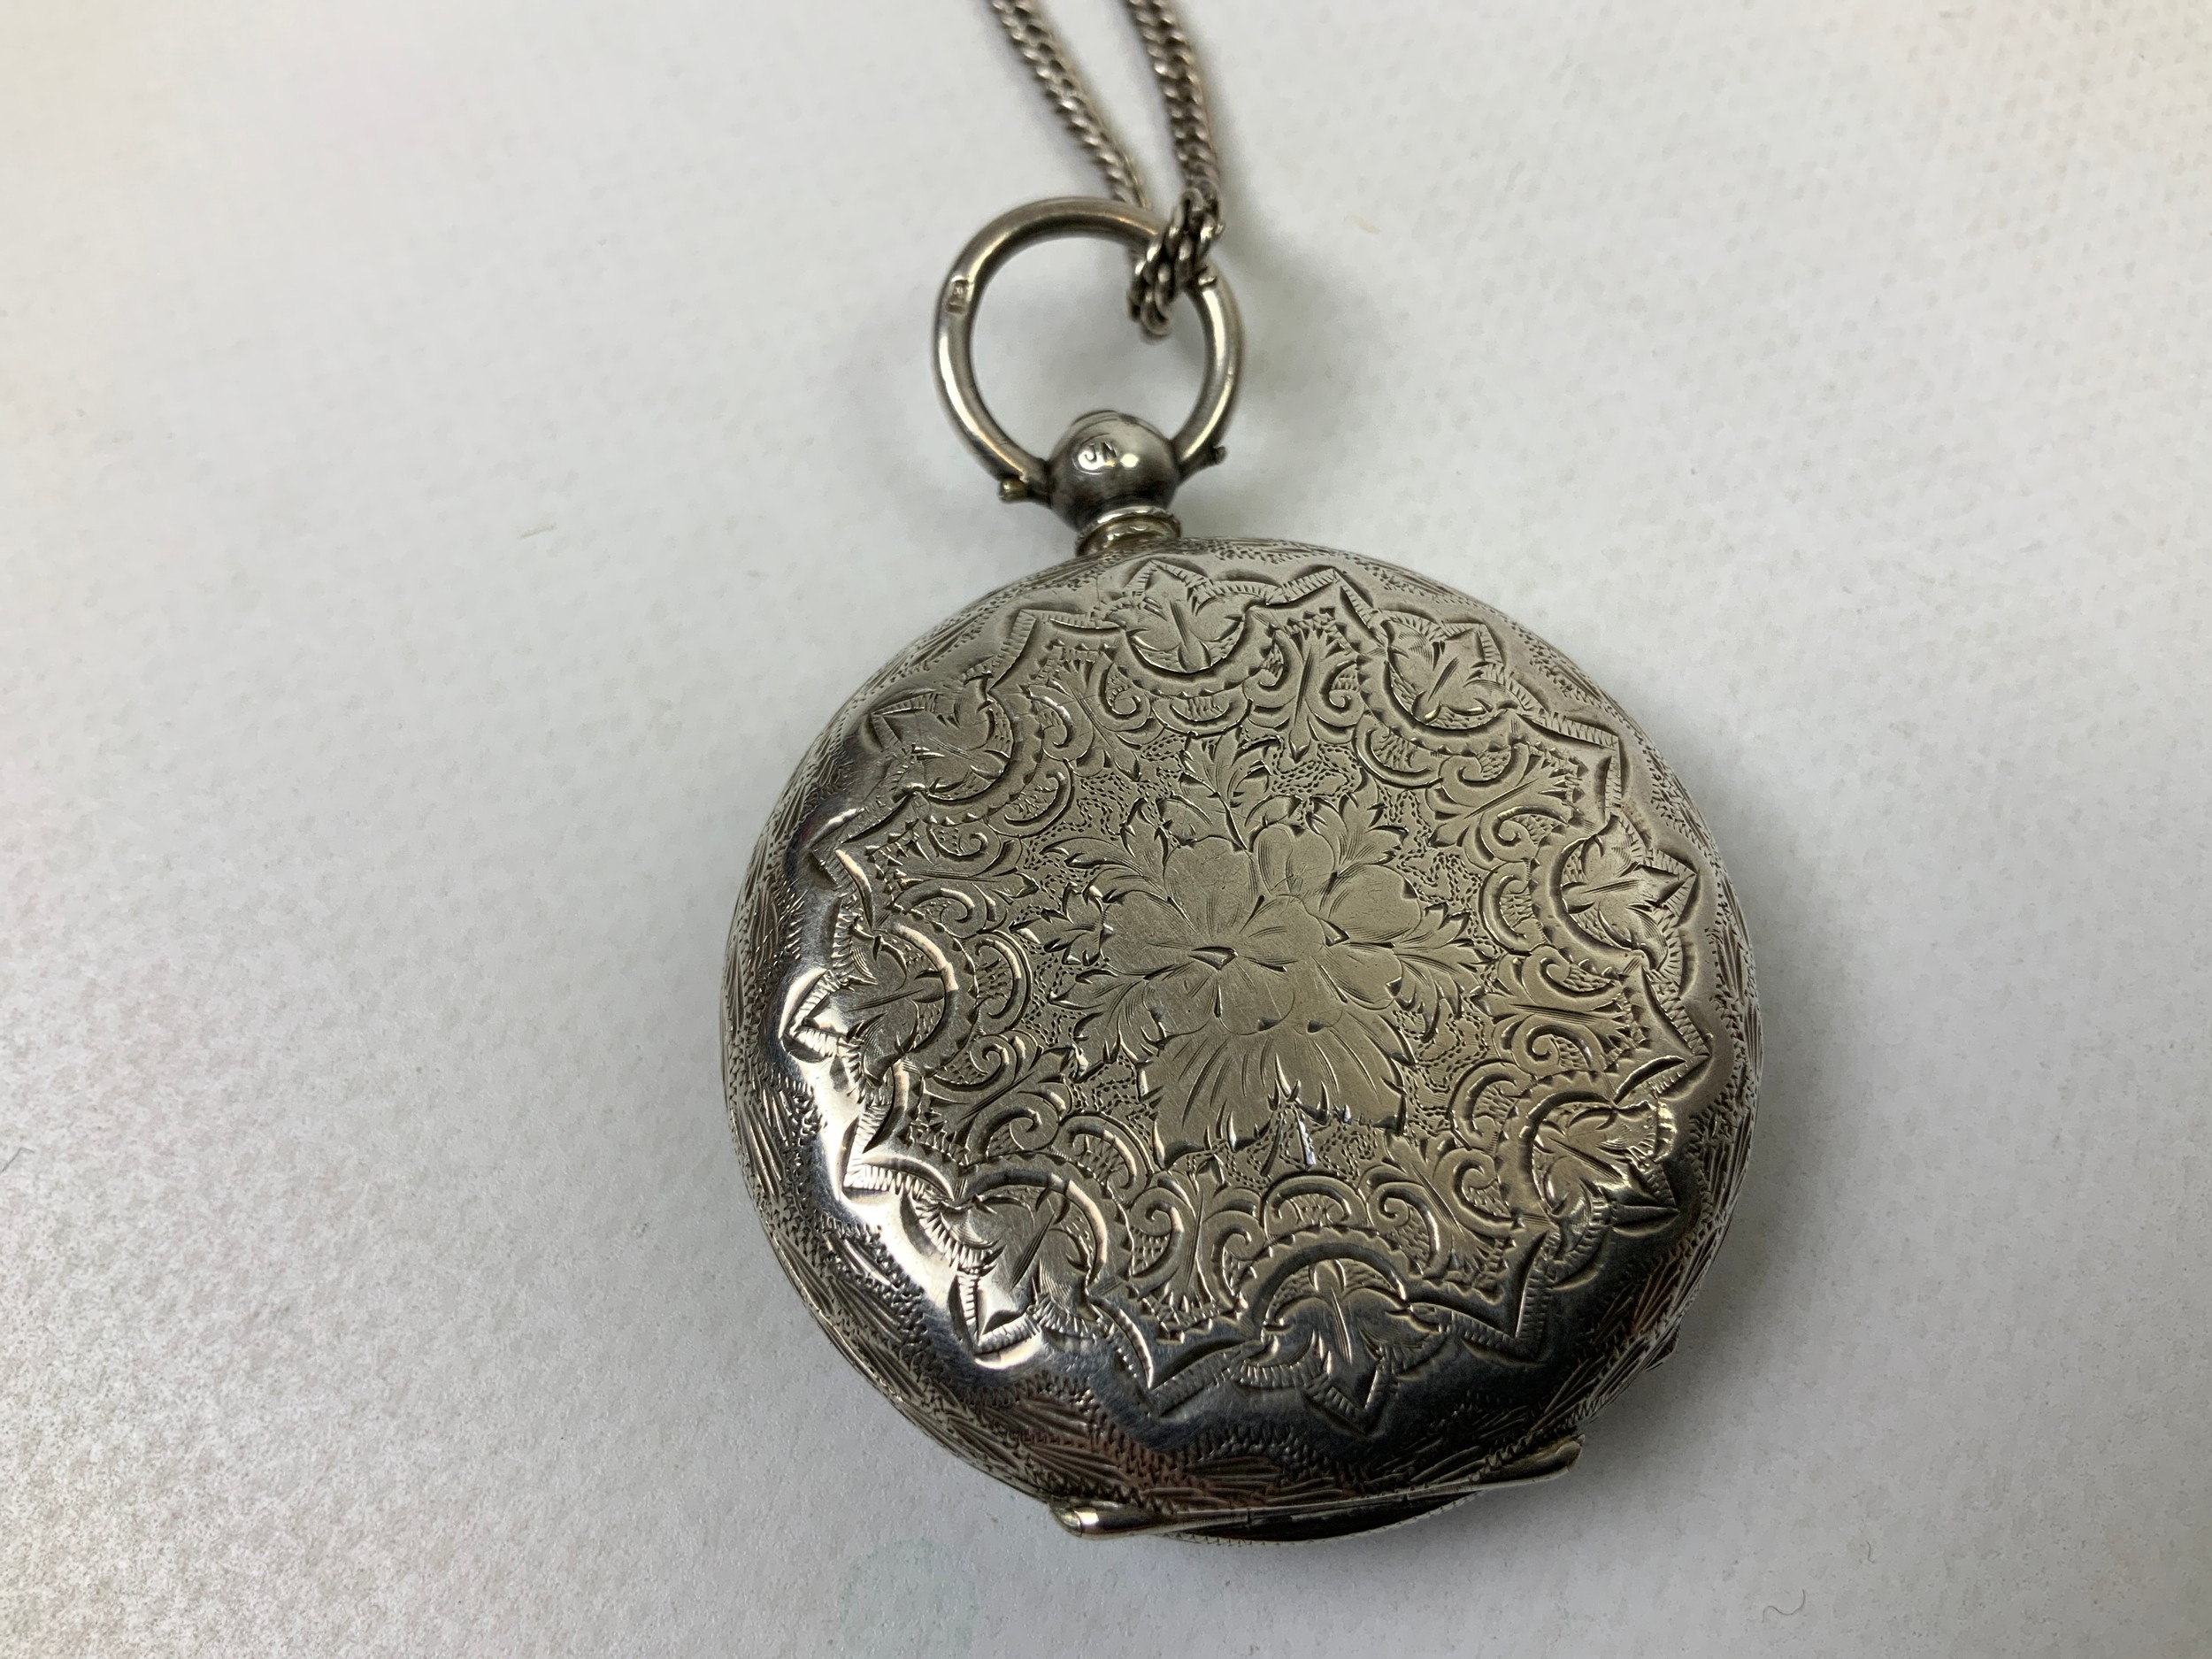 Silver Pocket Watch on Silver Chain - Image 4 of 4